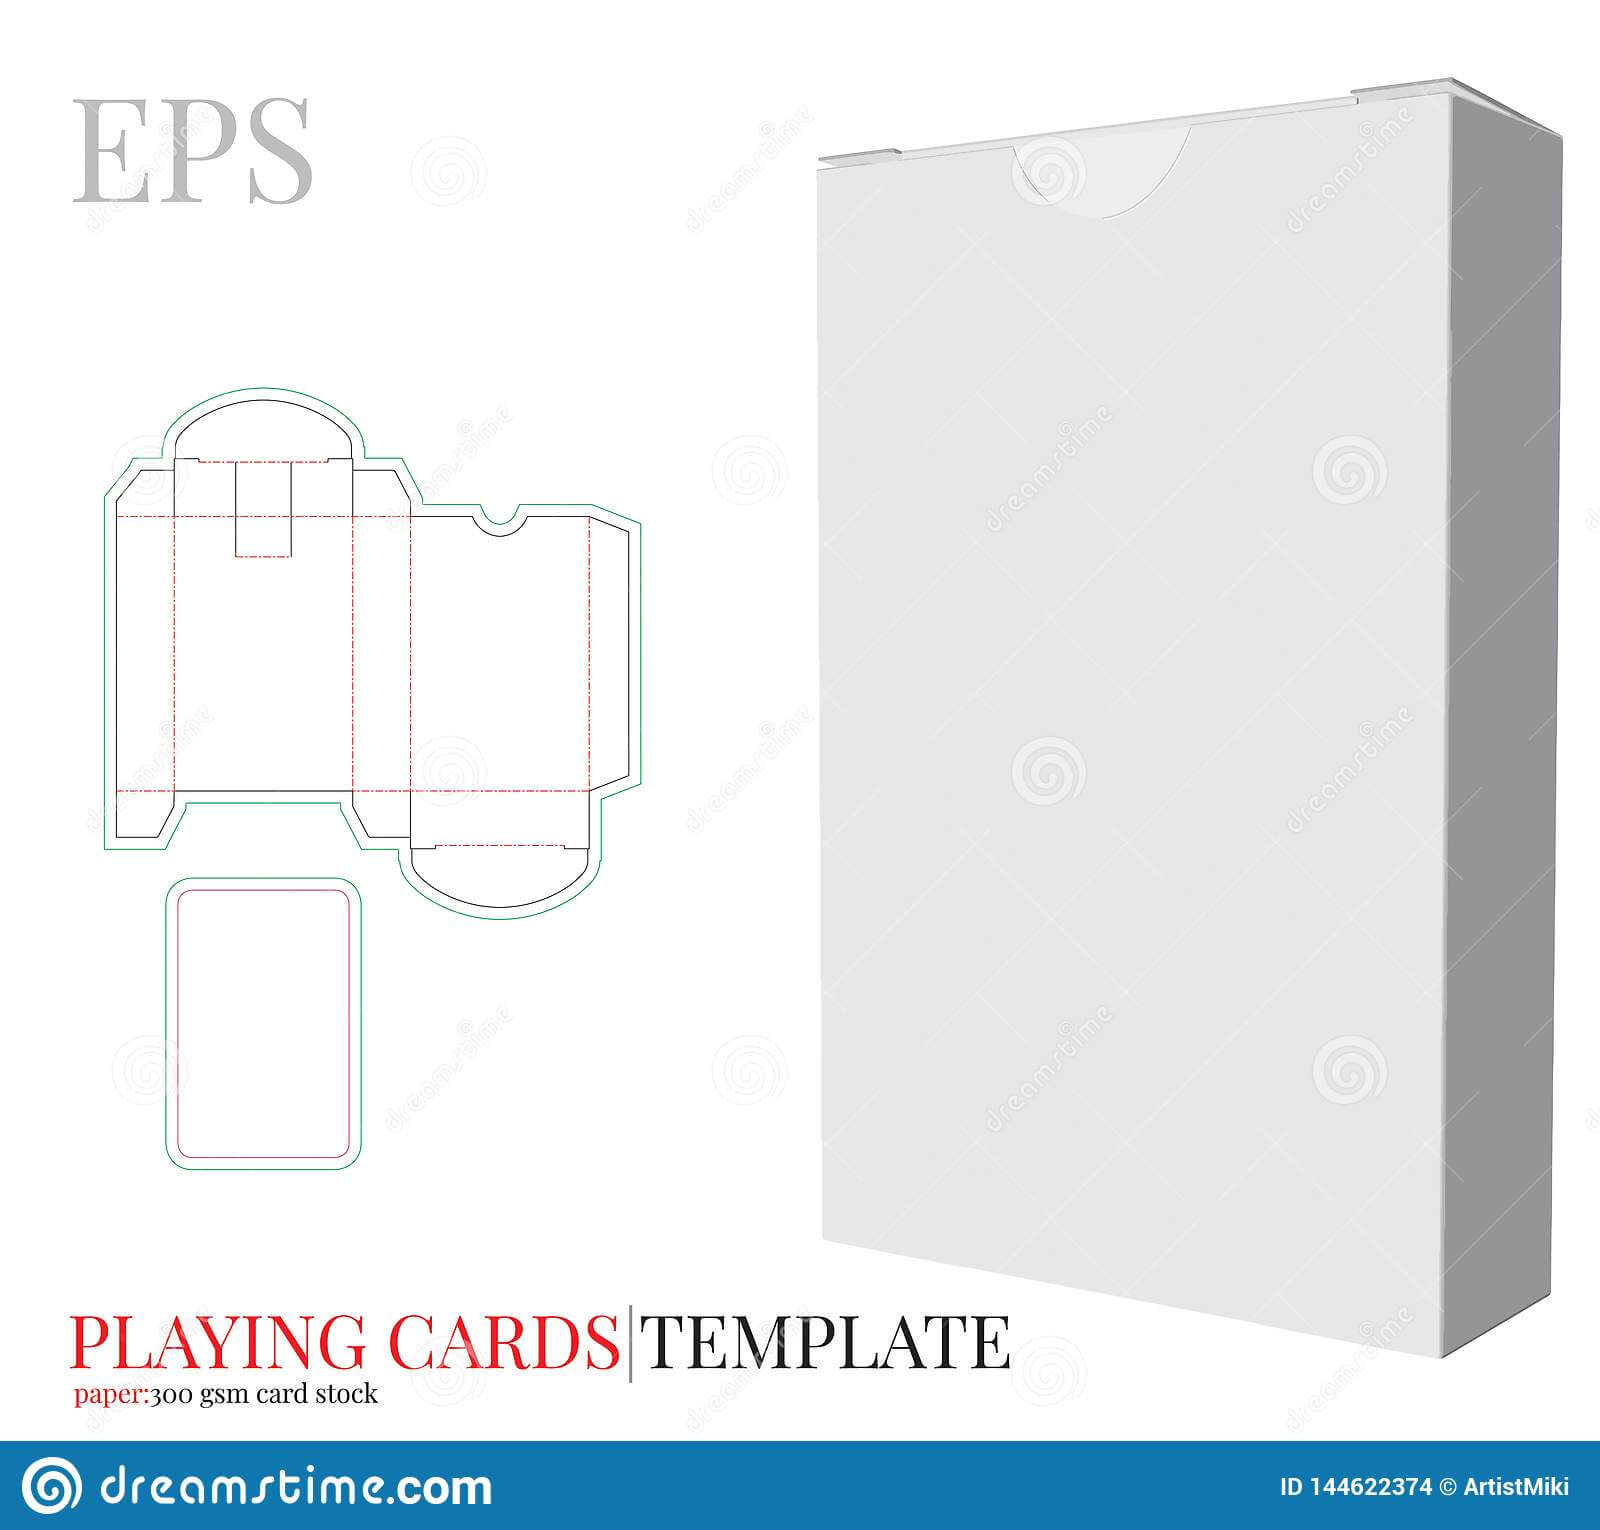 Playing Cards Template And Playing Cards Box Template Vector With Blank Playing Card Template